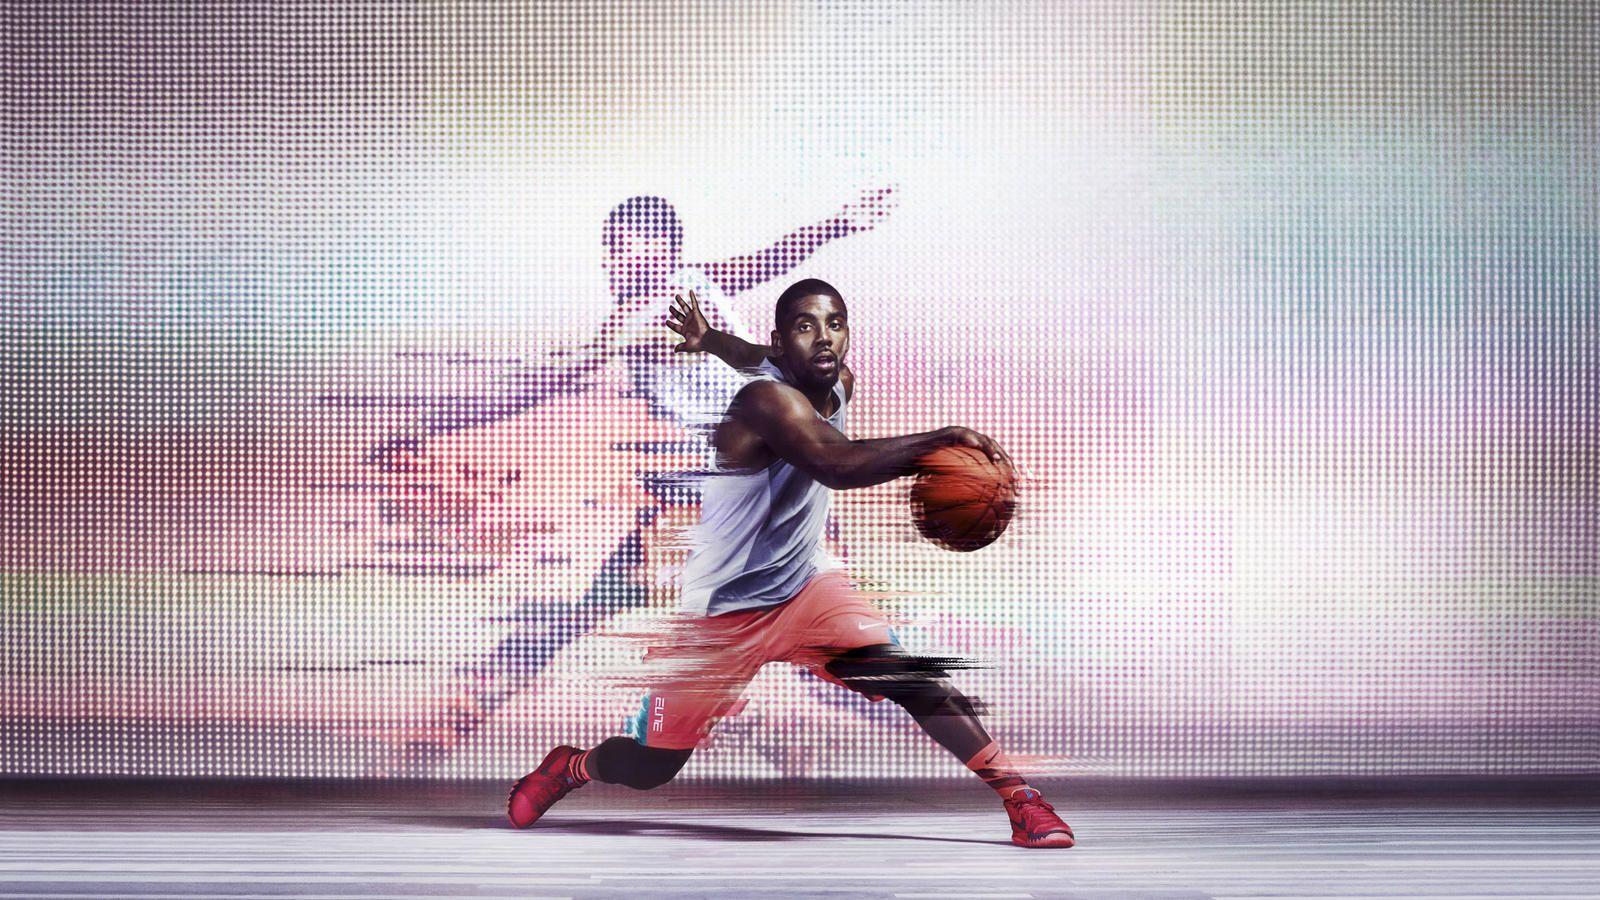 Kyrie Irving Logo - Nike Welcomes Kyrie Irving to its Esteemed Signature Athlete Family ...